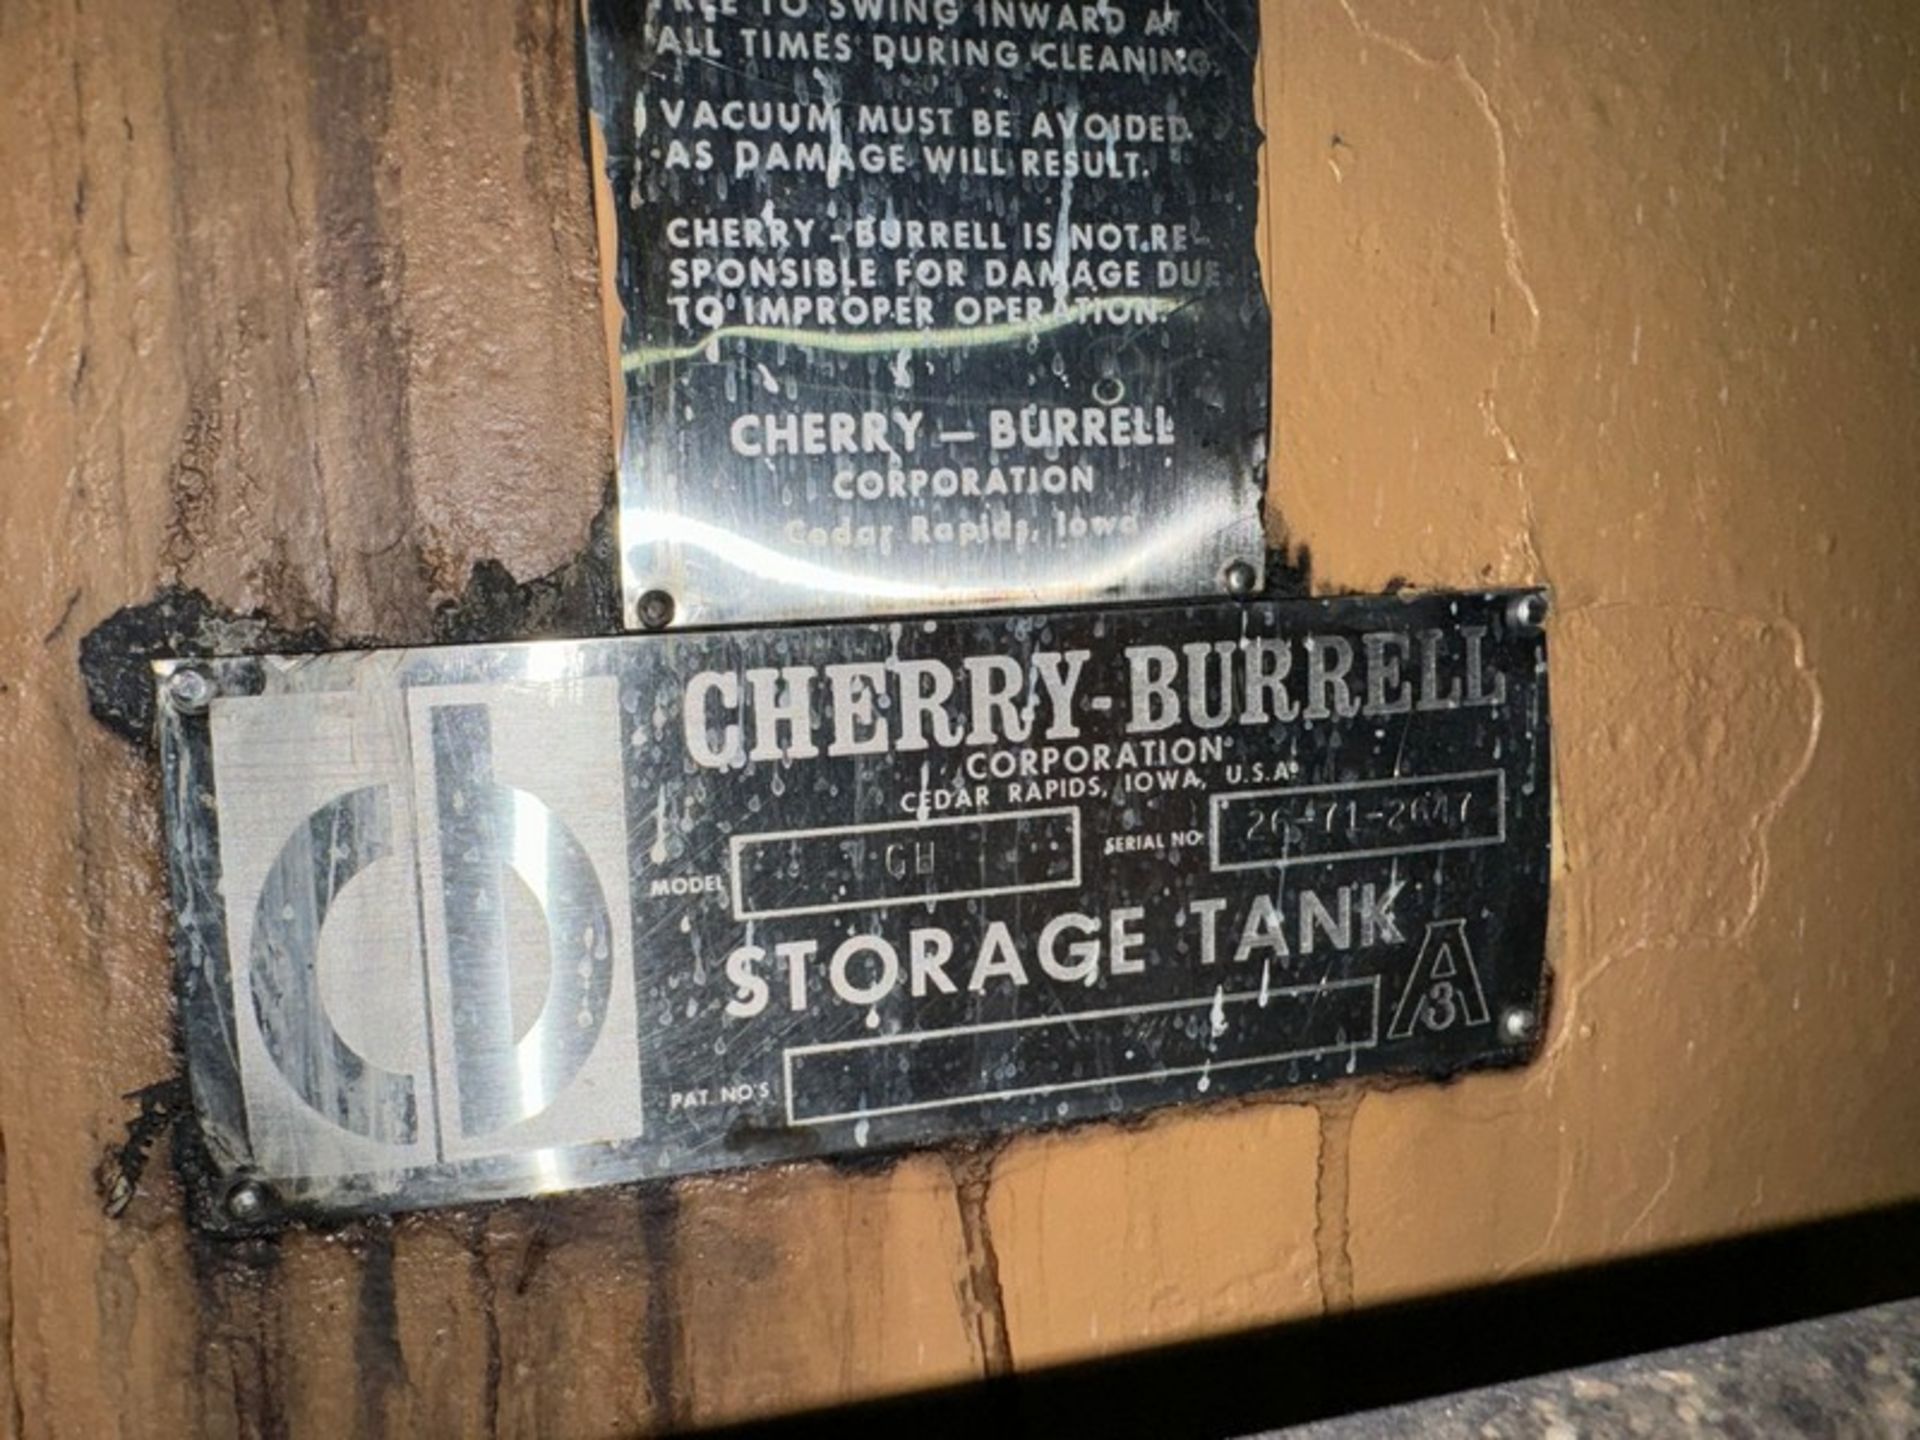 Cherry-Burrell Aprox. 2,500 Gal. S/S Single Wall Tank, M/N GH, S/N 26-70-2647, with Front Man - Image 3 of 4